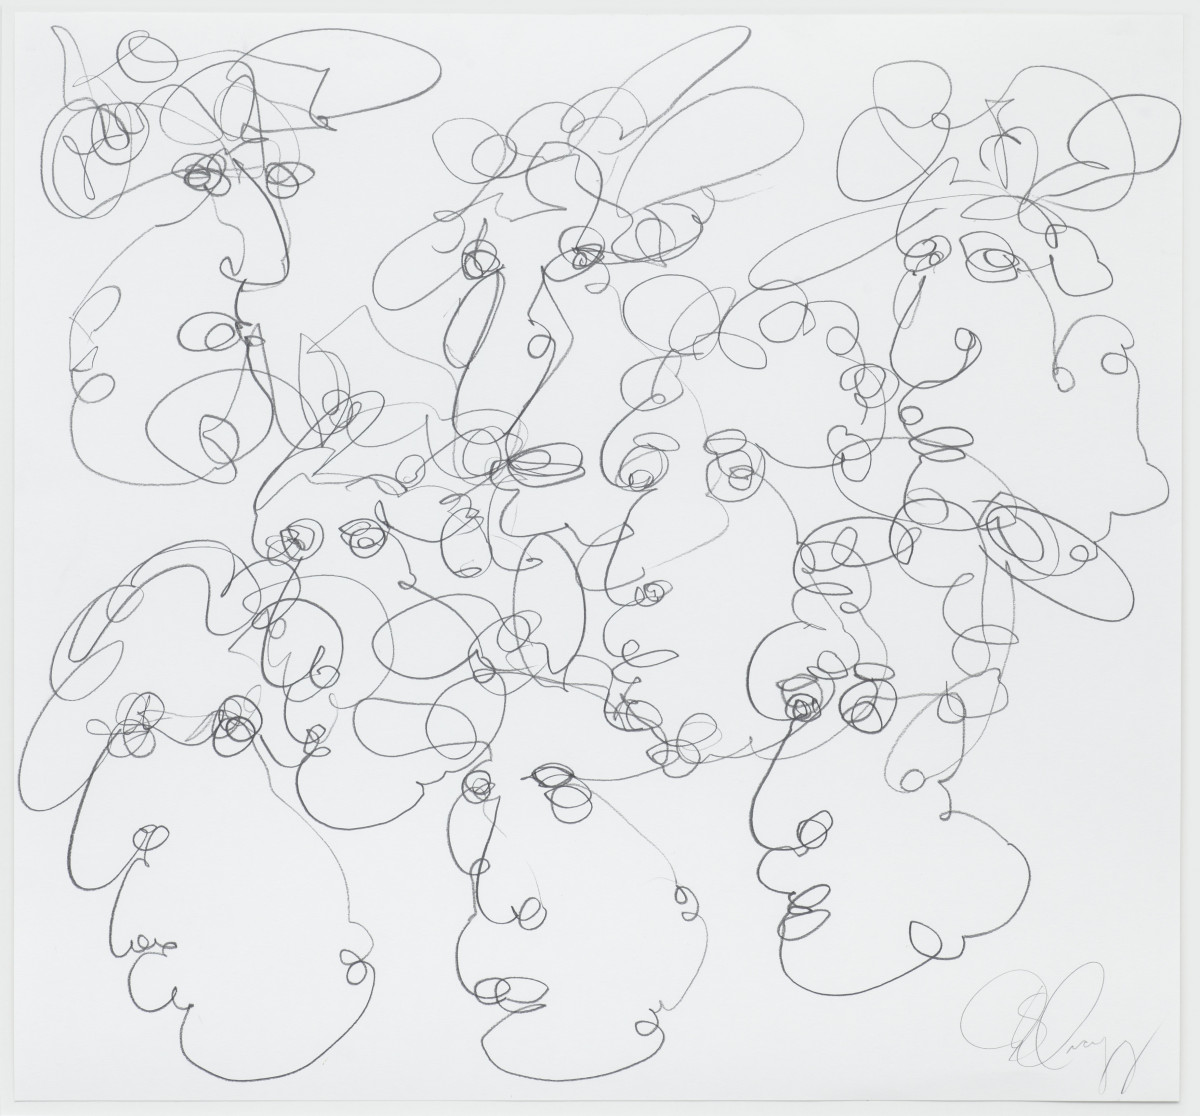 Tony Cragg, ‘Untitled’, 2010, Pencil on paper